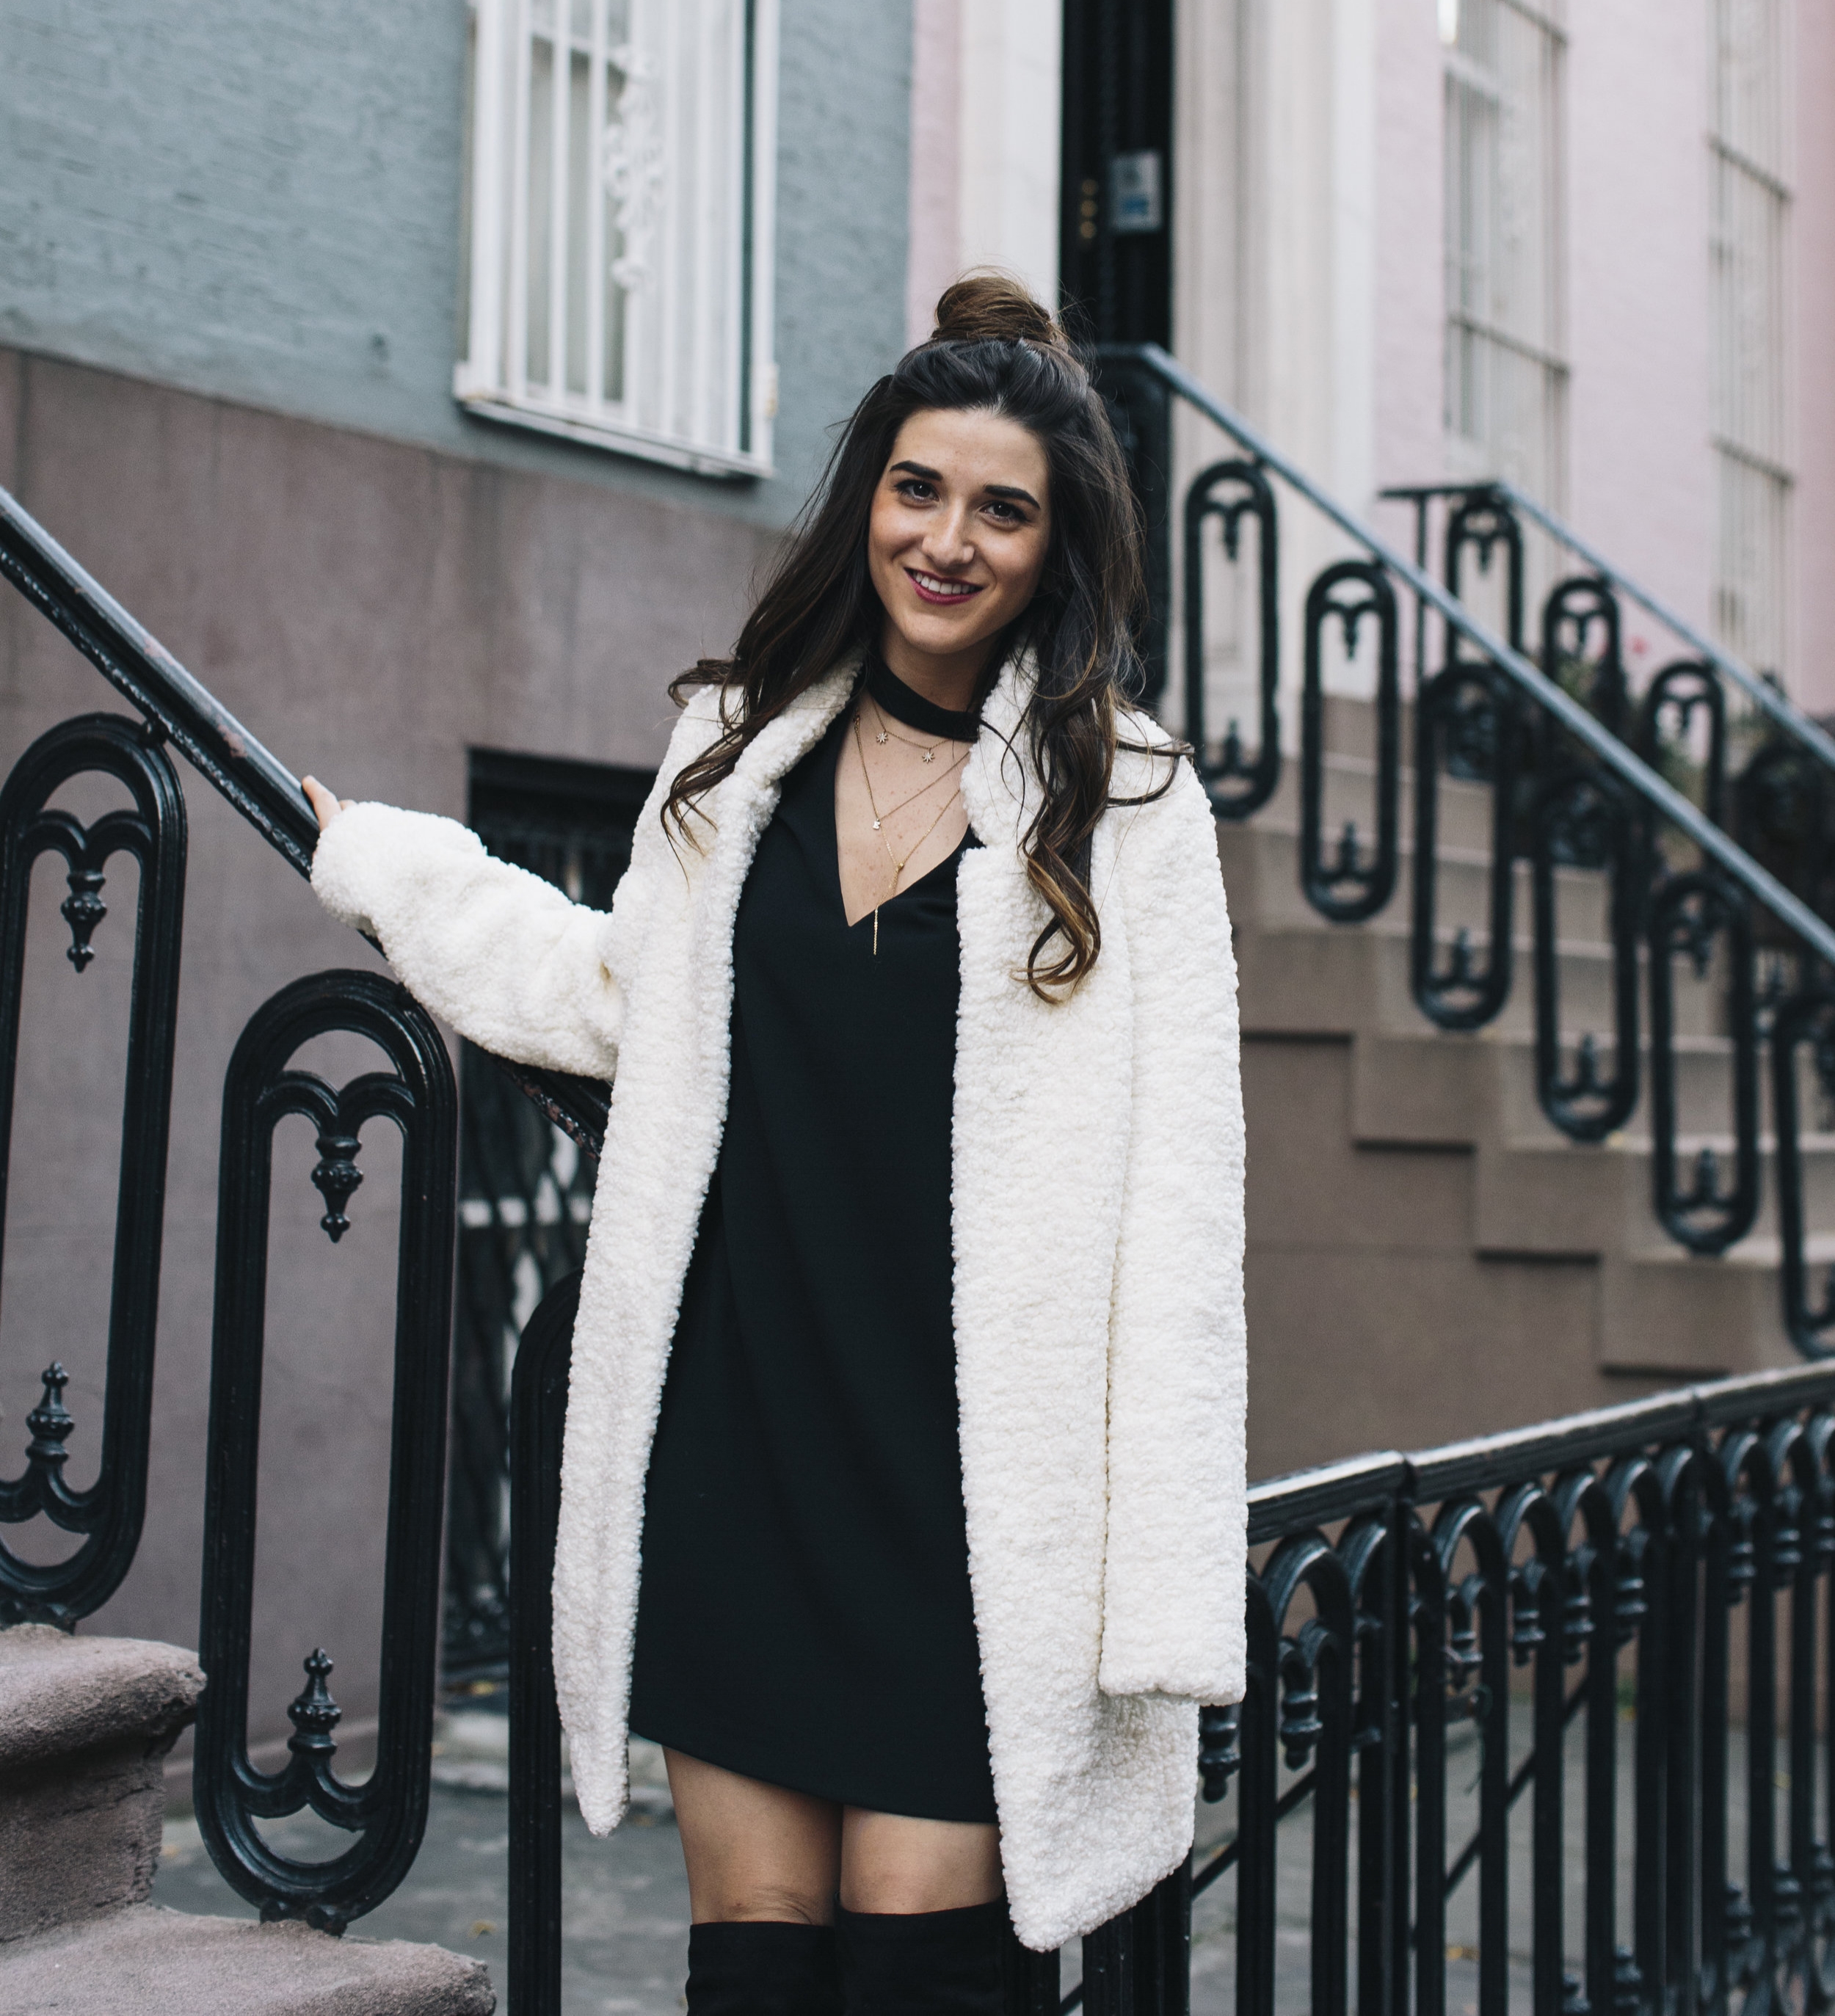 Teddy Bear Coat + OTN Boots How To Avoid Blogger Depression Louboutins & Love Fashion Blog Esther Santer NYC Street Style Blogger Outfit OOTD Trendy Ivanka Trump Nordstrom Bloomingdales Black Dress Zara Pretty Online Shopping Wear Shoes Bun Women Girl.jpg